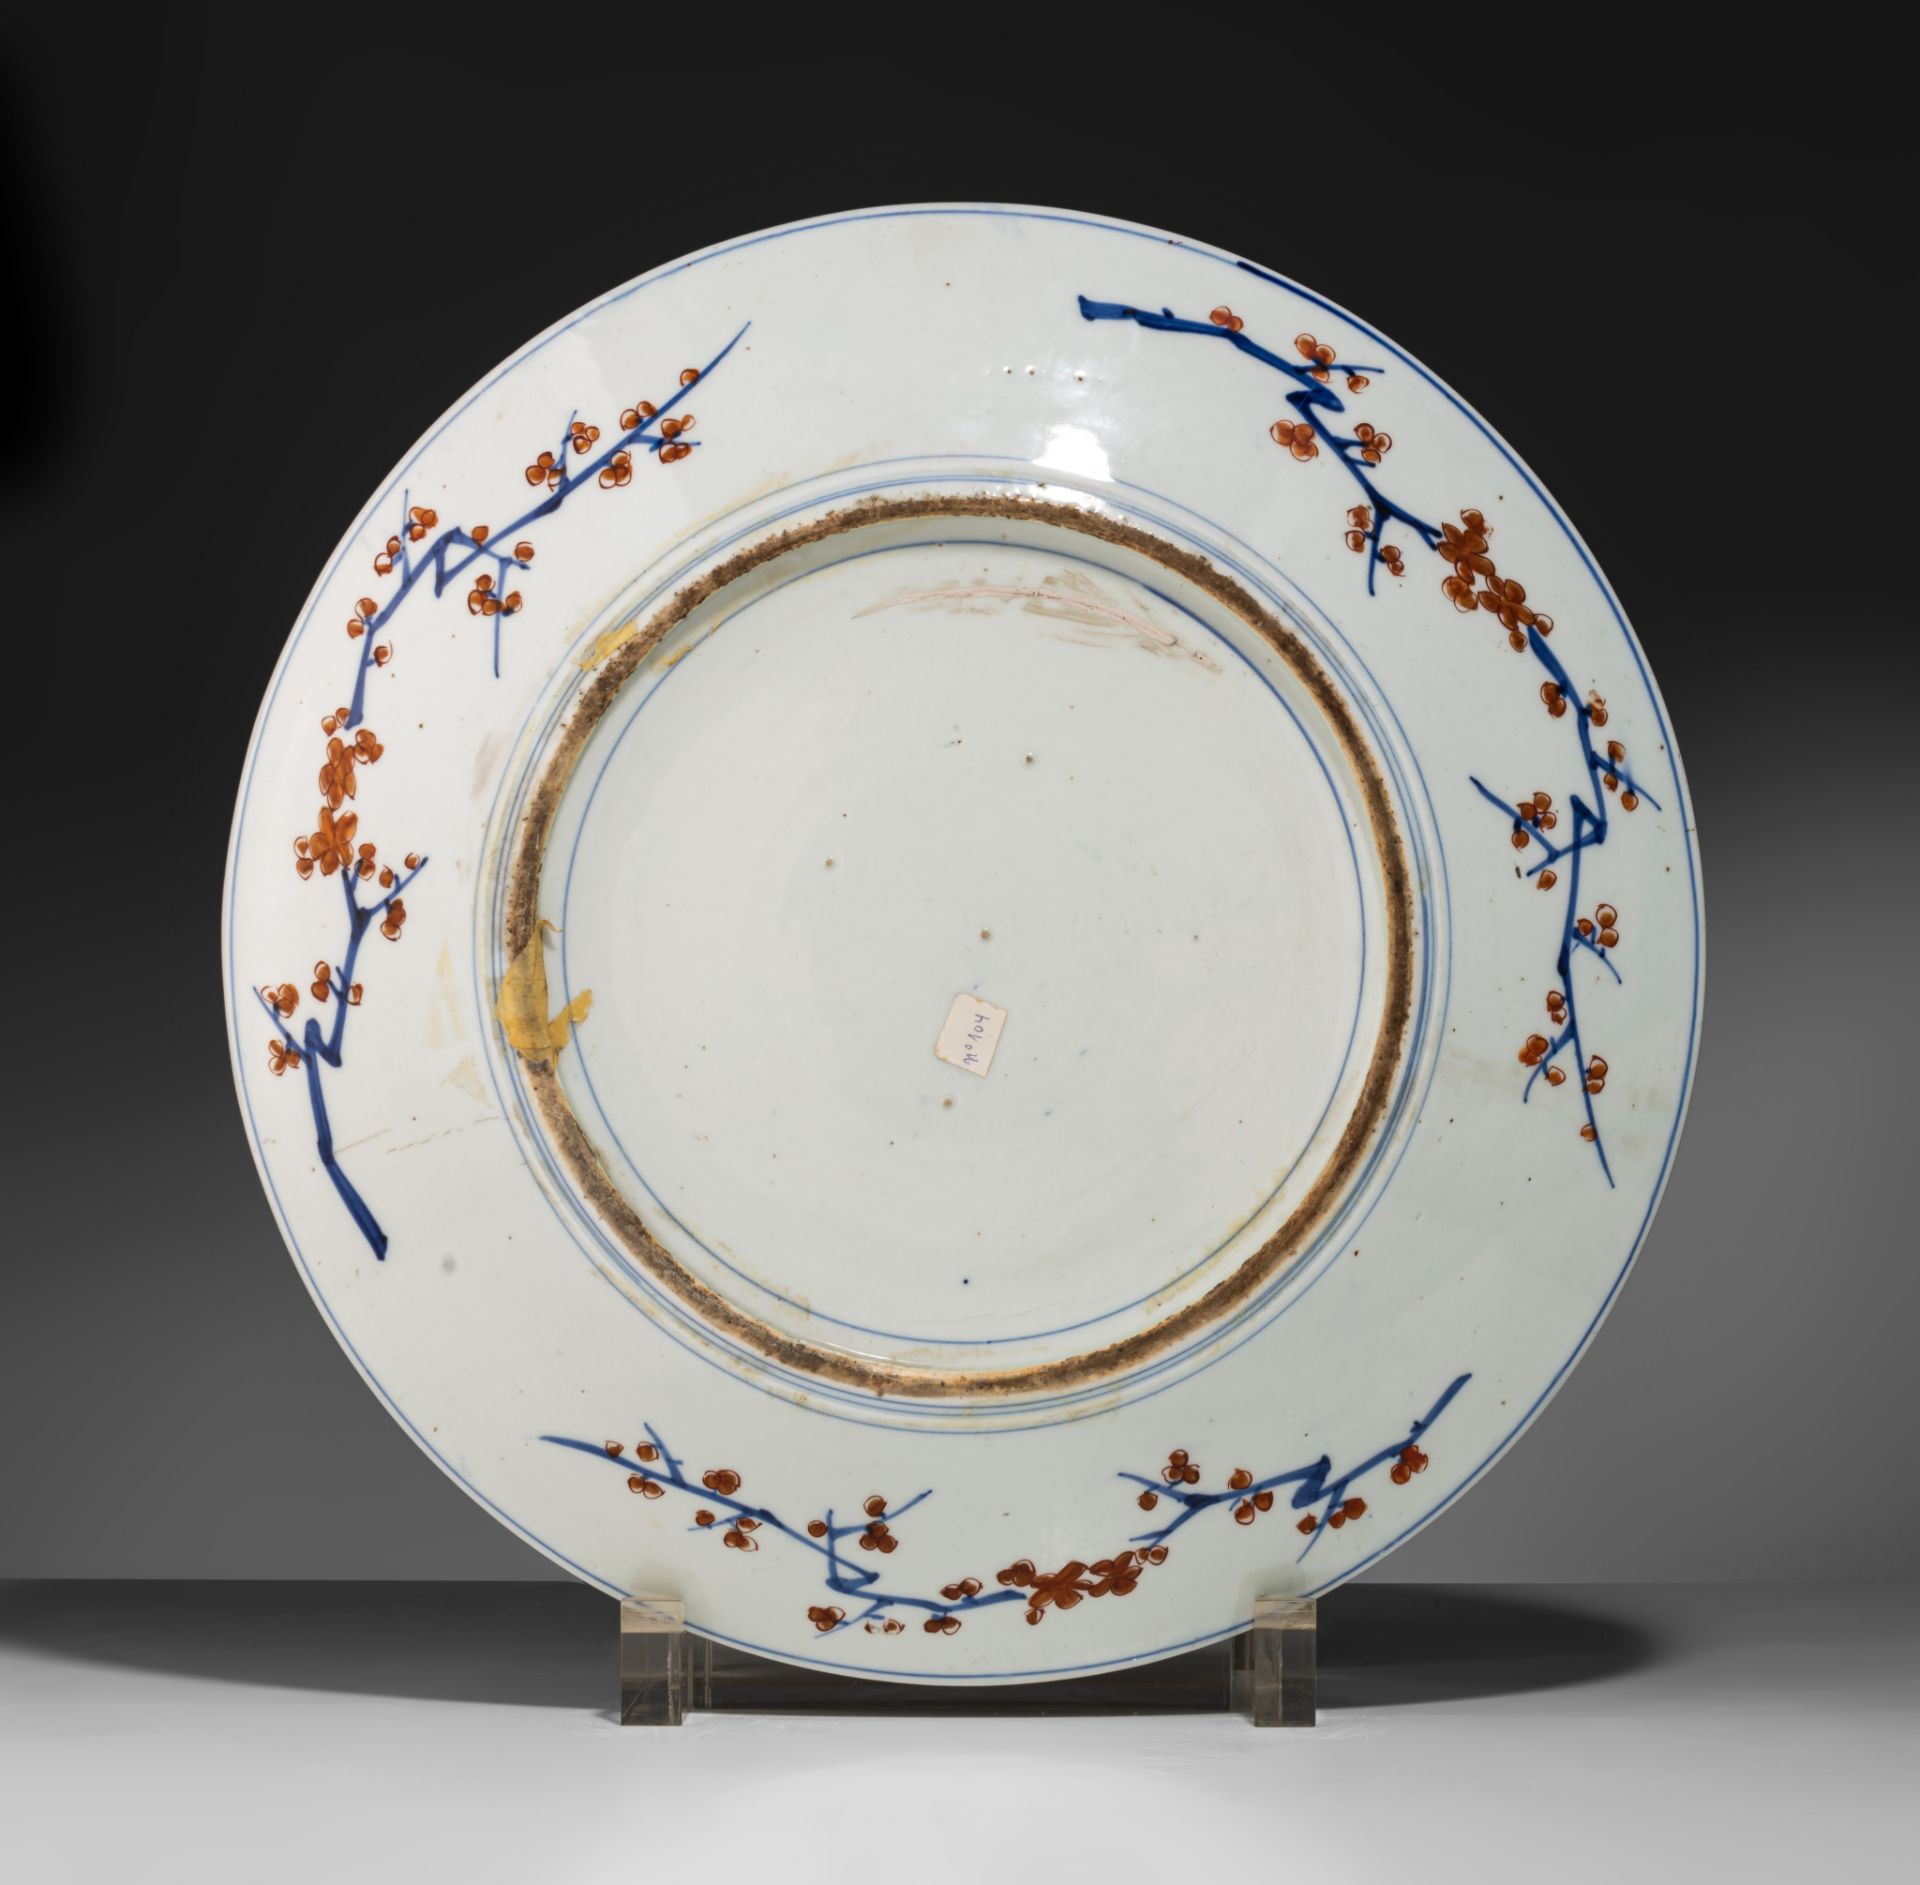 A Japanese Imari charger and a 'Rolled' plate, late 19thC, ø 47,5 (charger) - 22,5 x 18 cm (plate) - Image 3 of 5